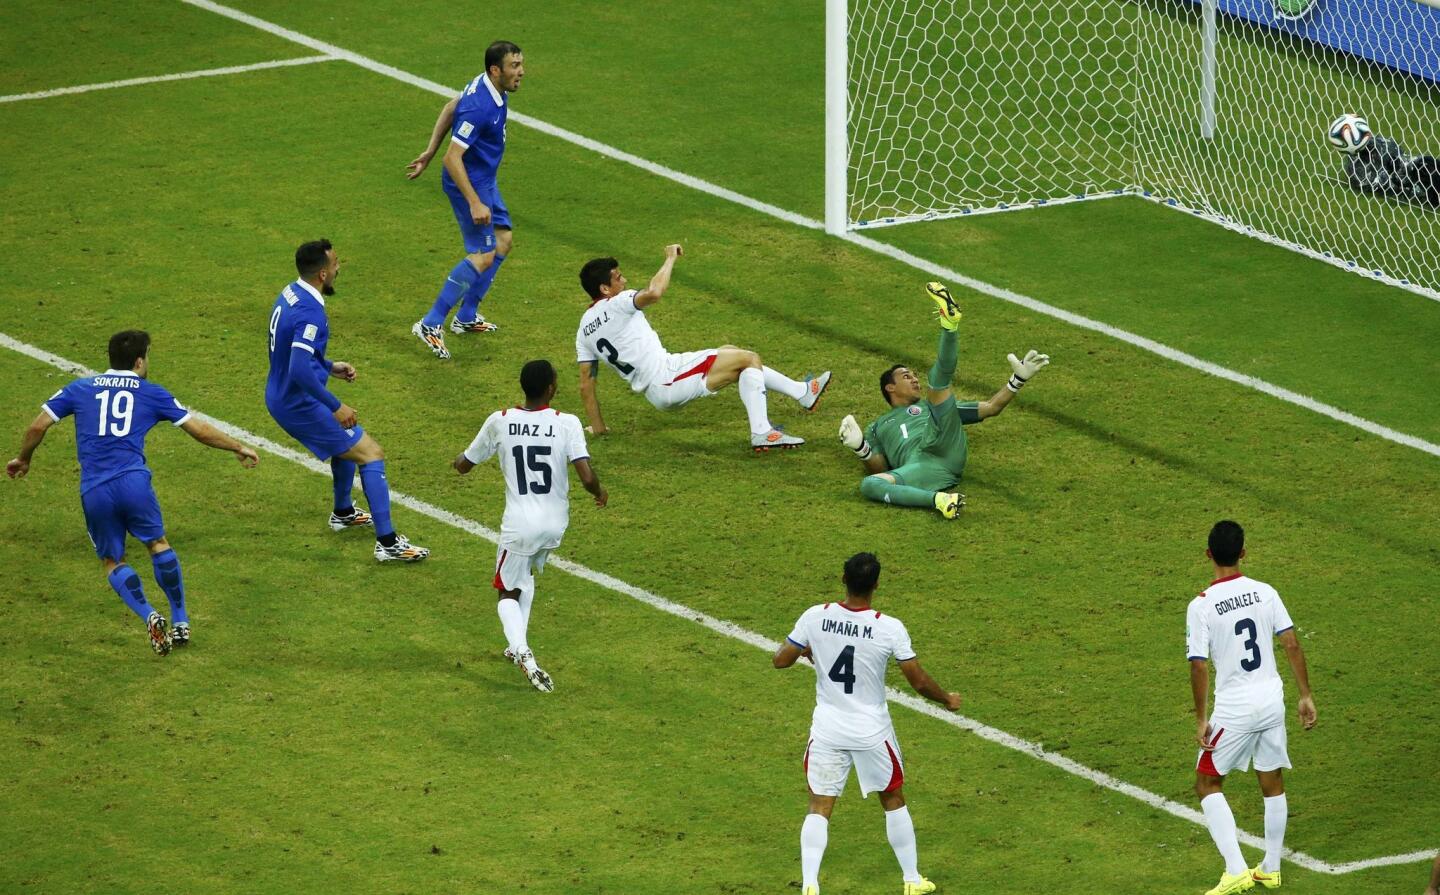 Greece's Papastathopoulos shoots to score against Costa Rica during their 2014 World Cup round of 16 game at the Pernambuco arena in Recife